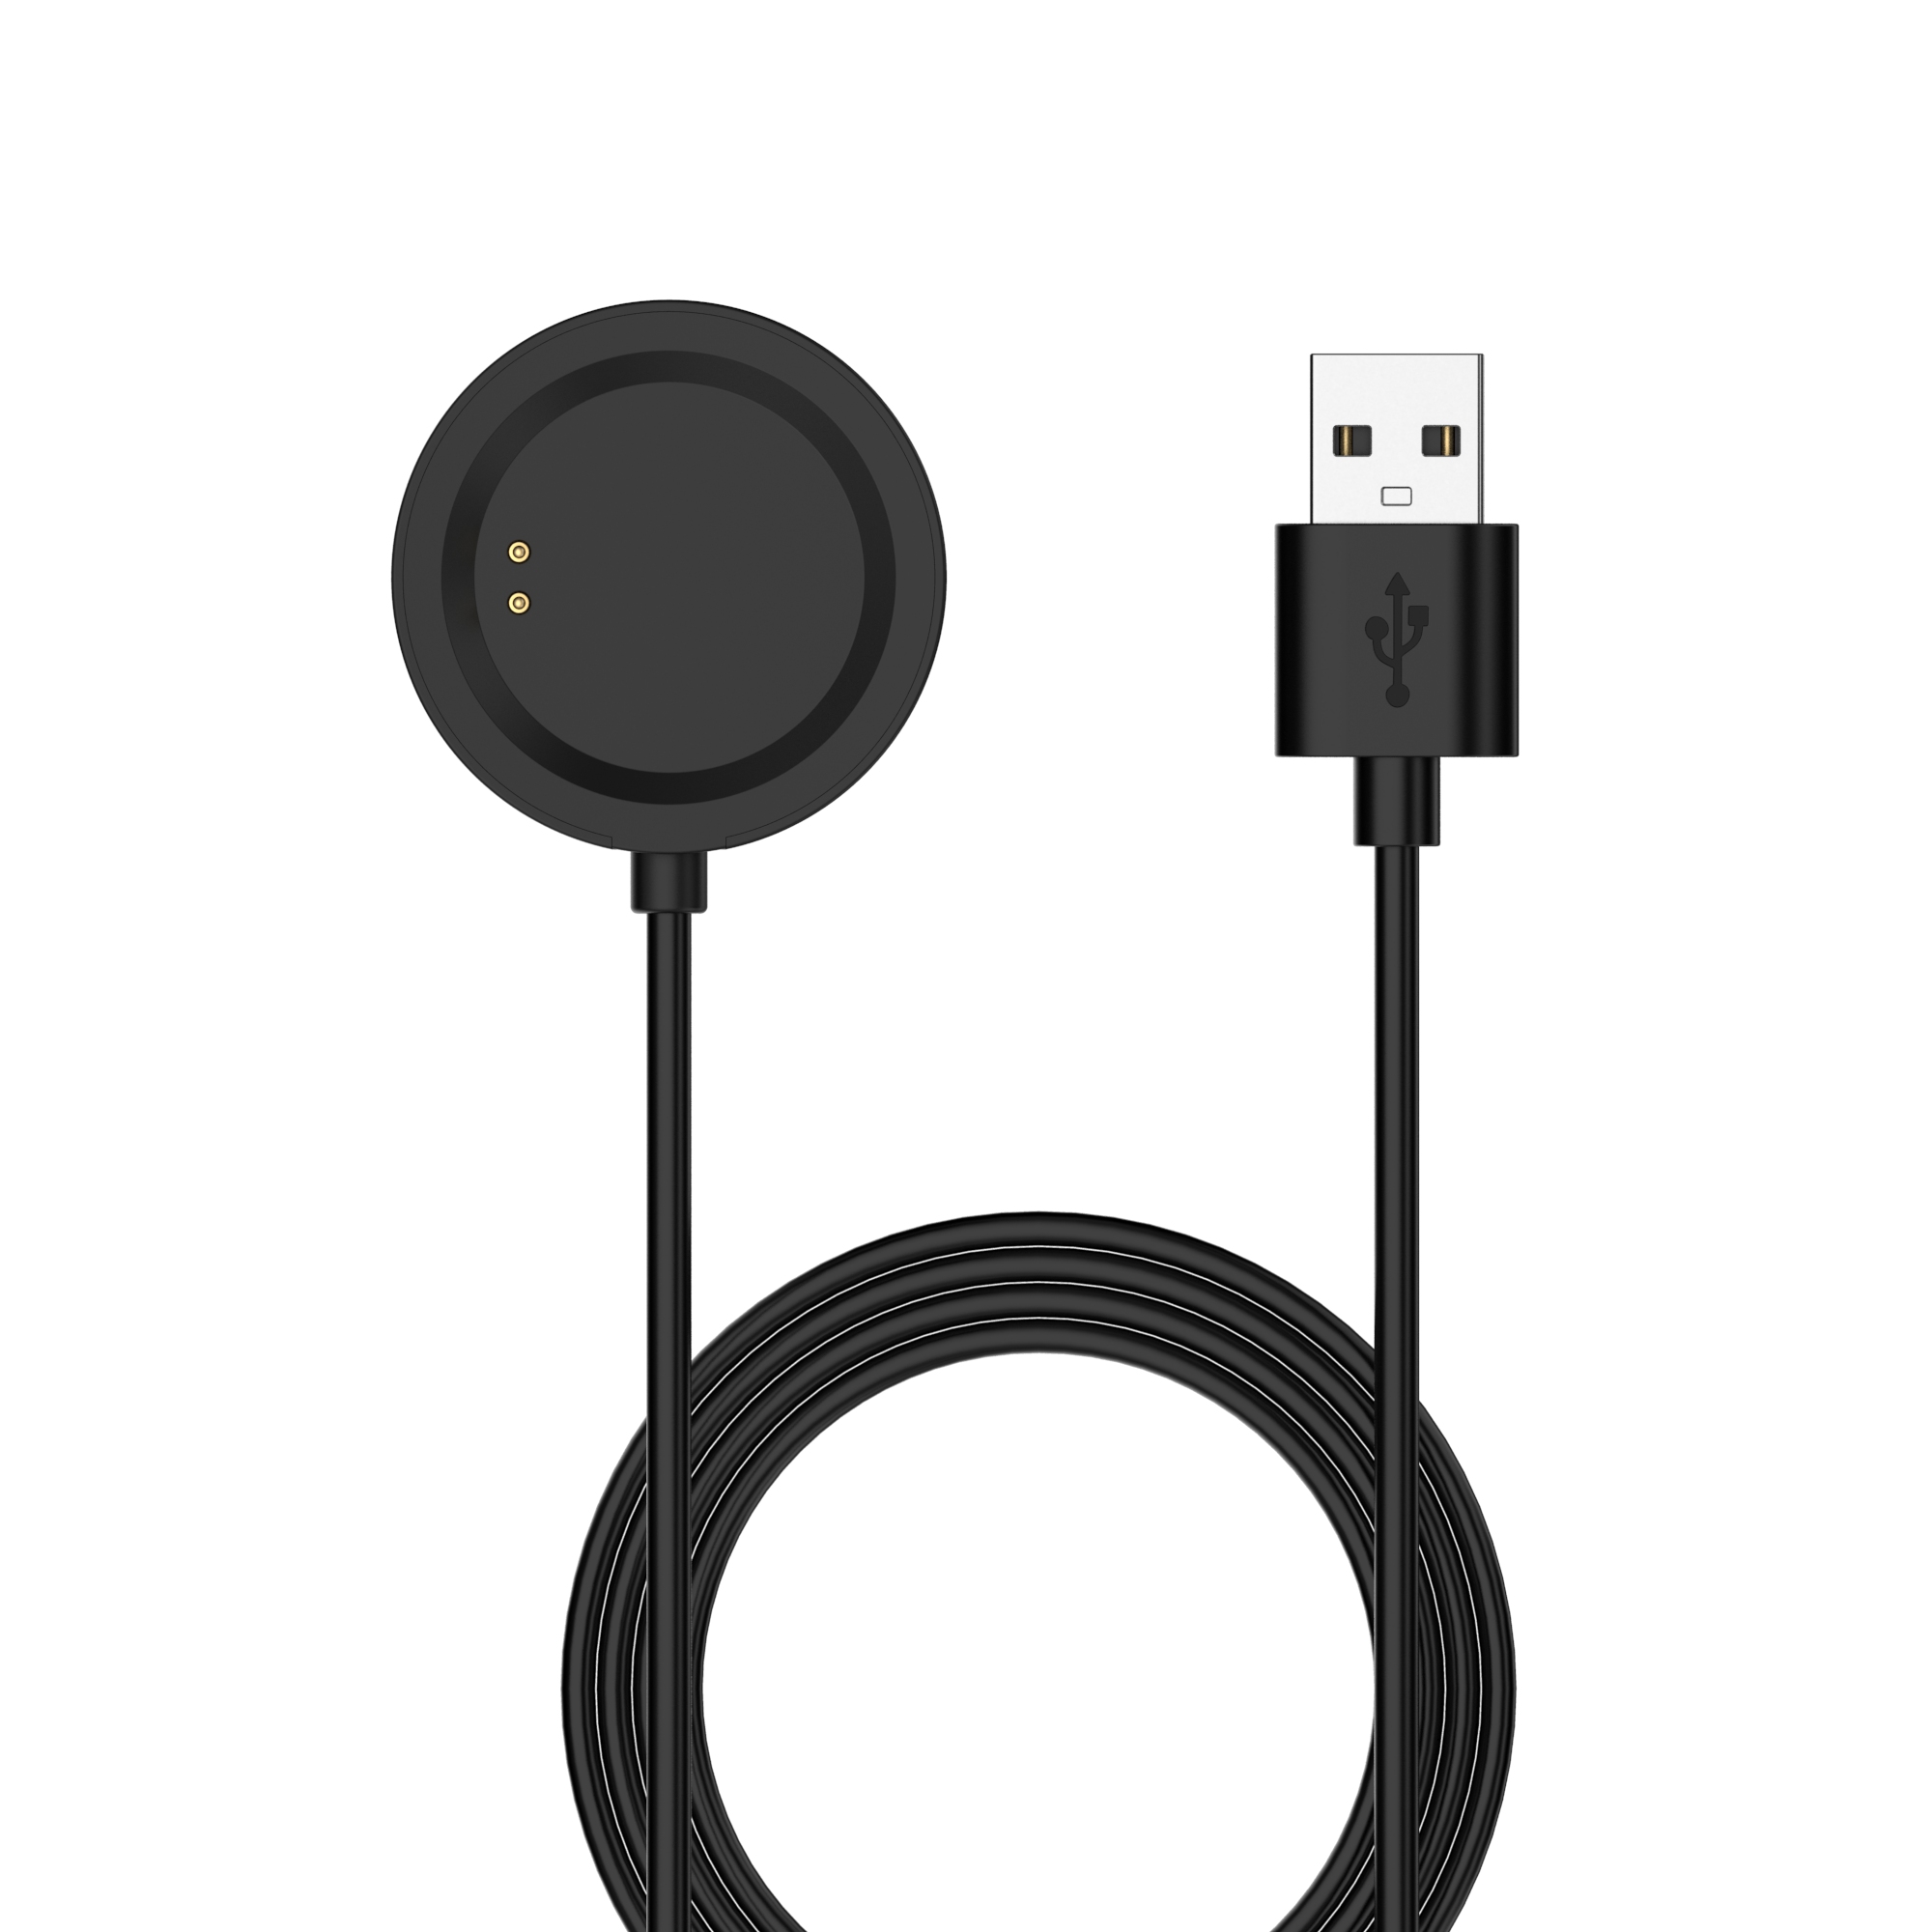 Bakeey-1m-Watch-Cable-Charging-Cable-for-Oneplus-Watch-1862266-1